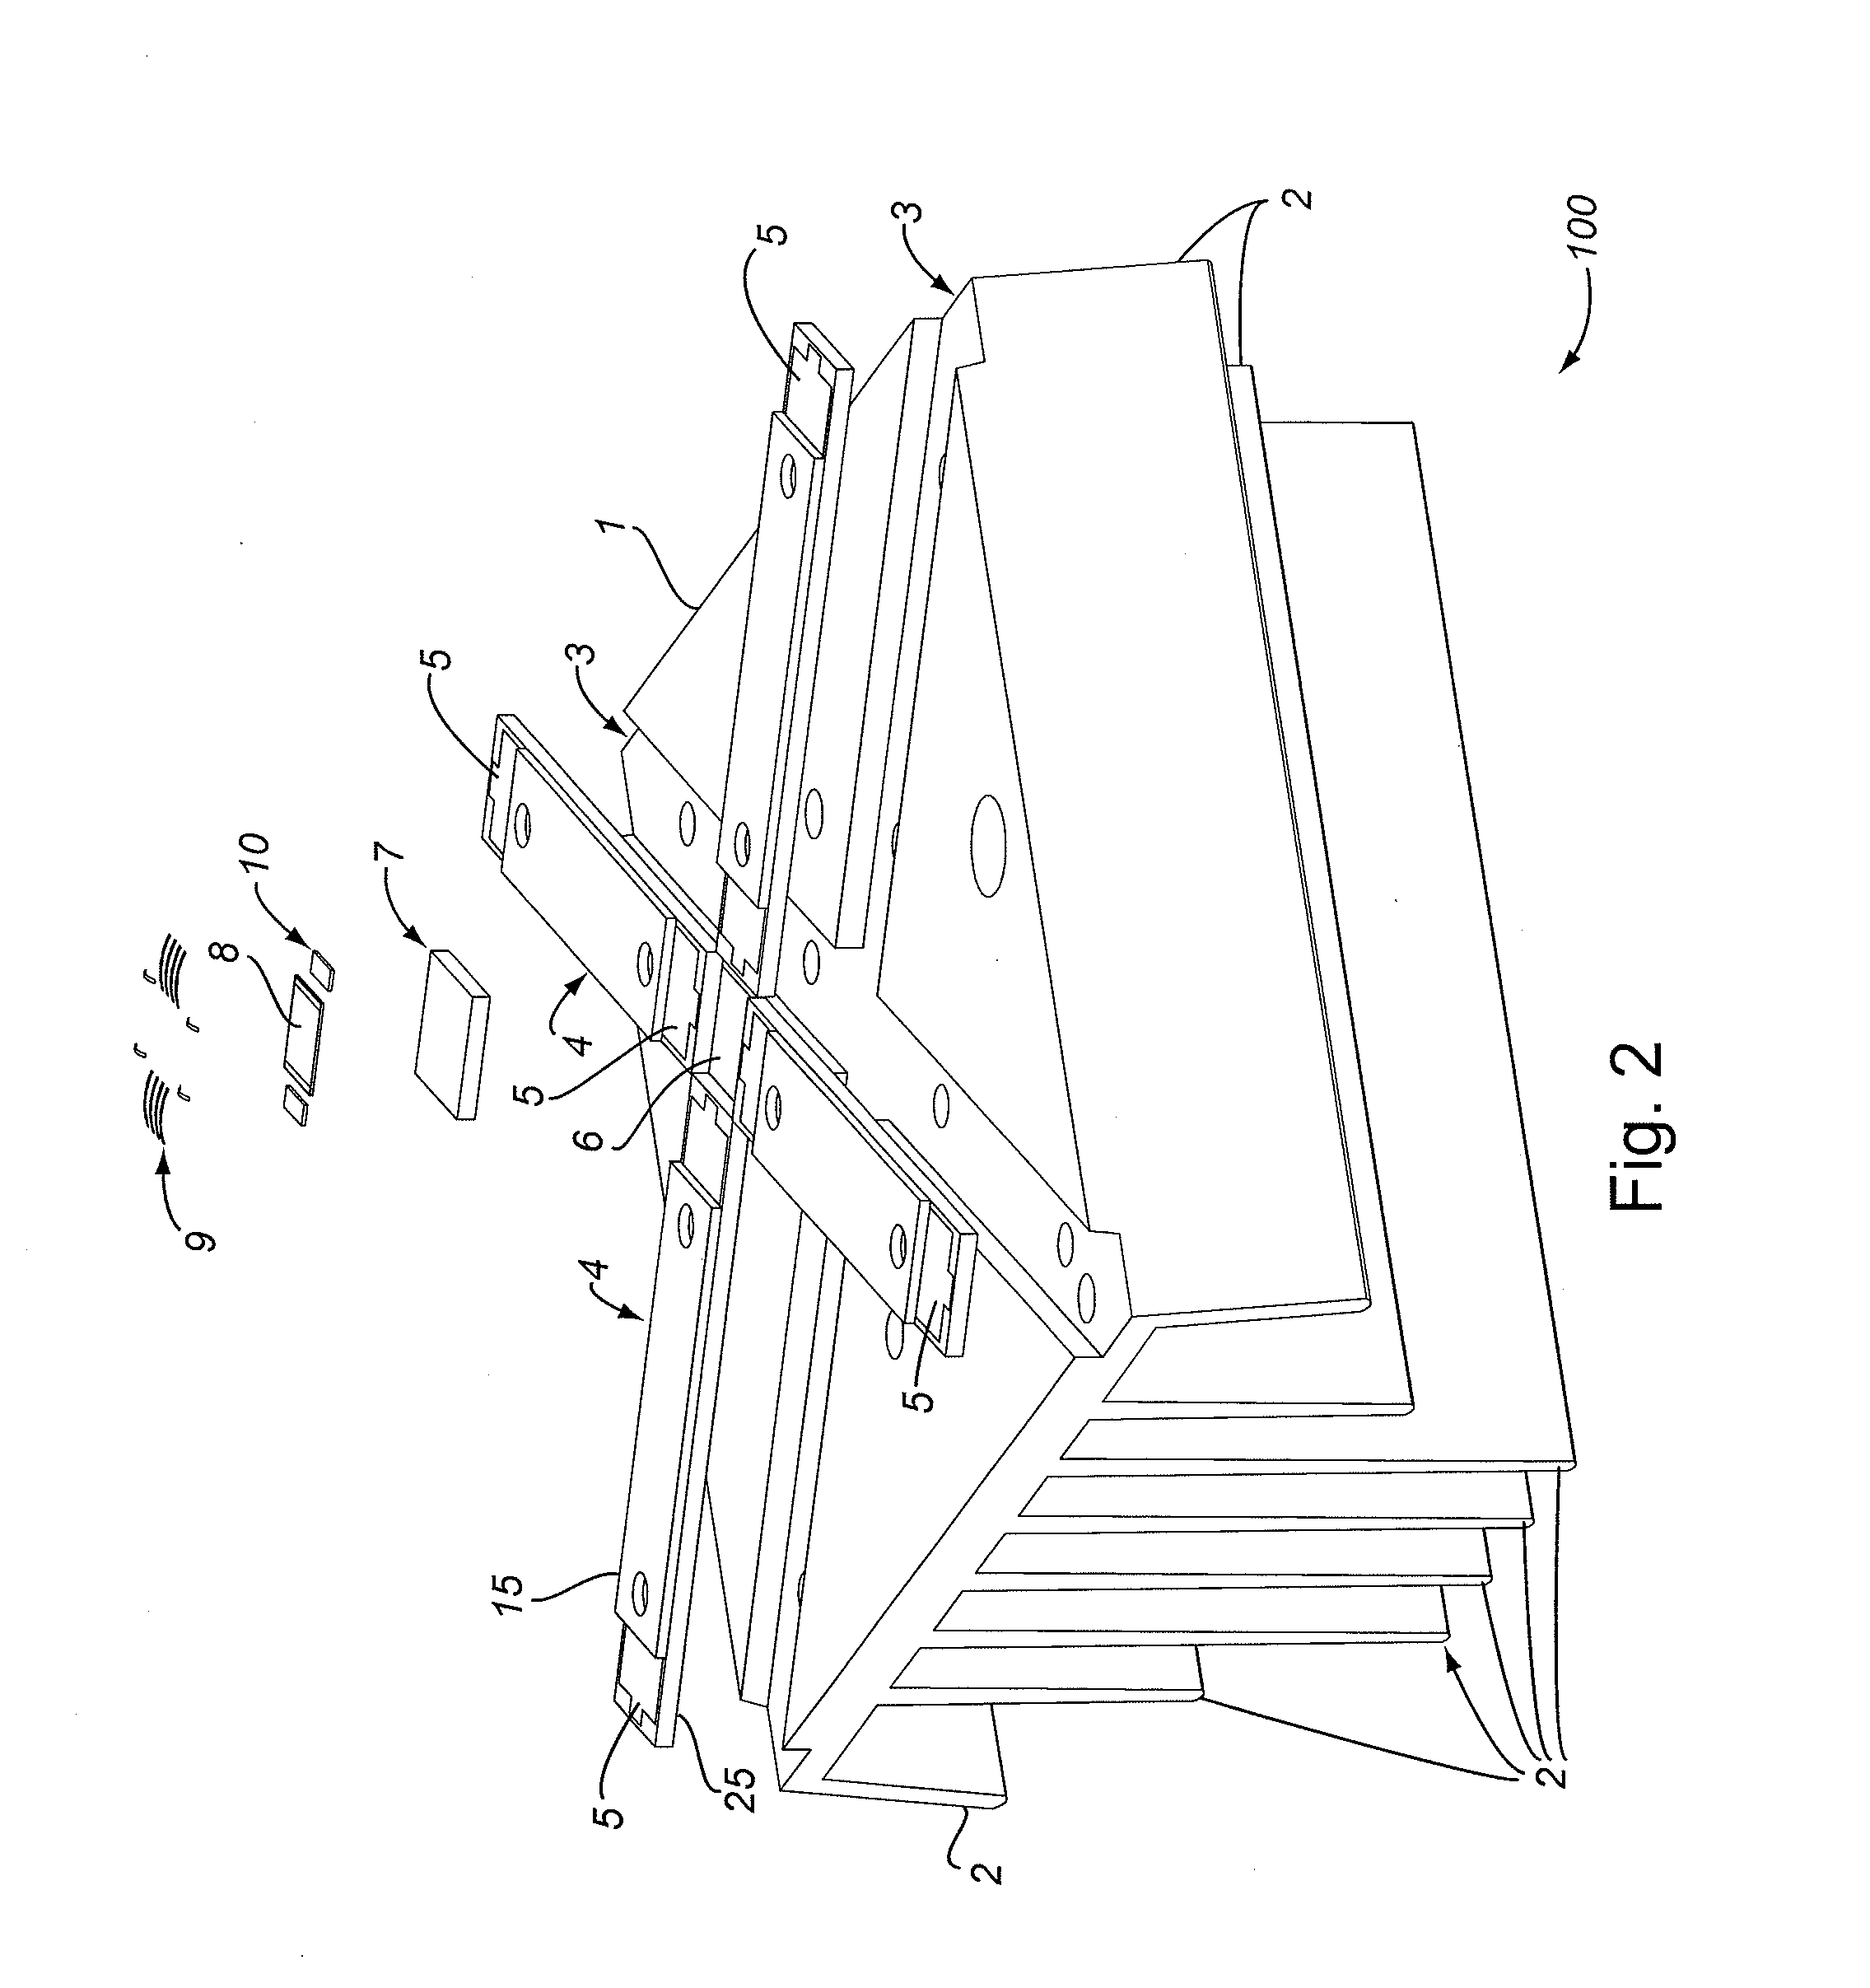 Integrated semiconductor solar cell package